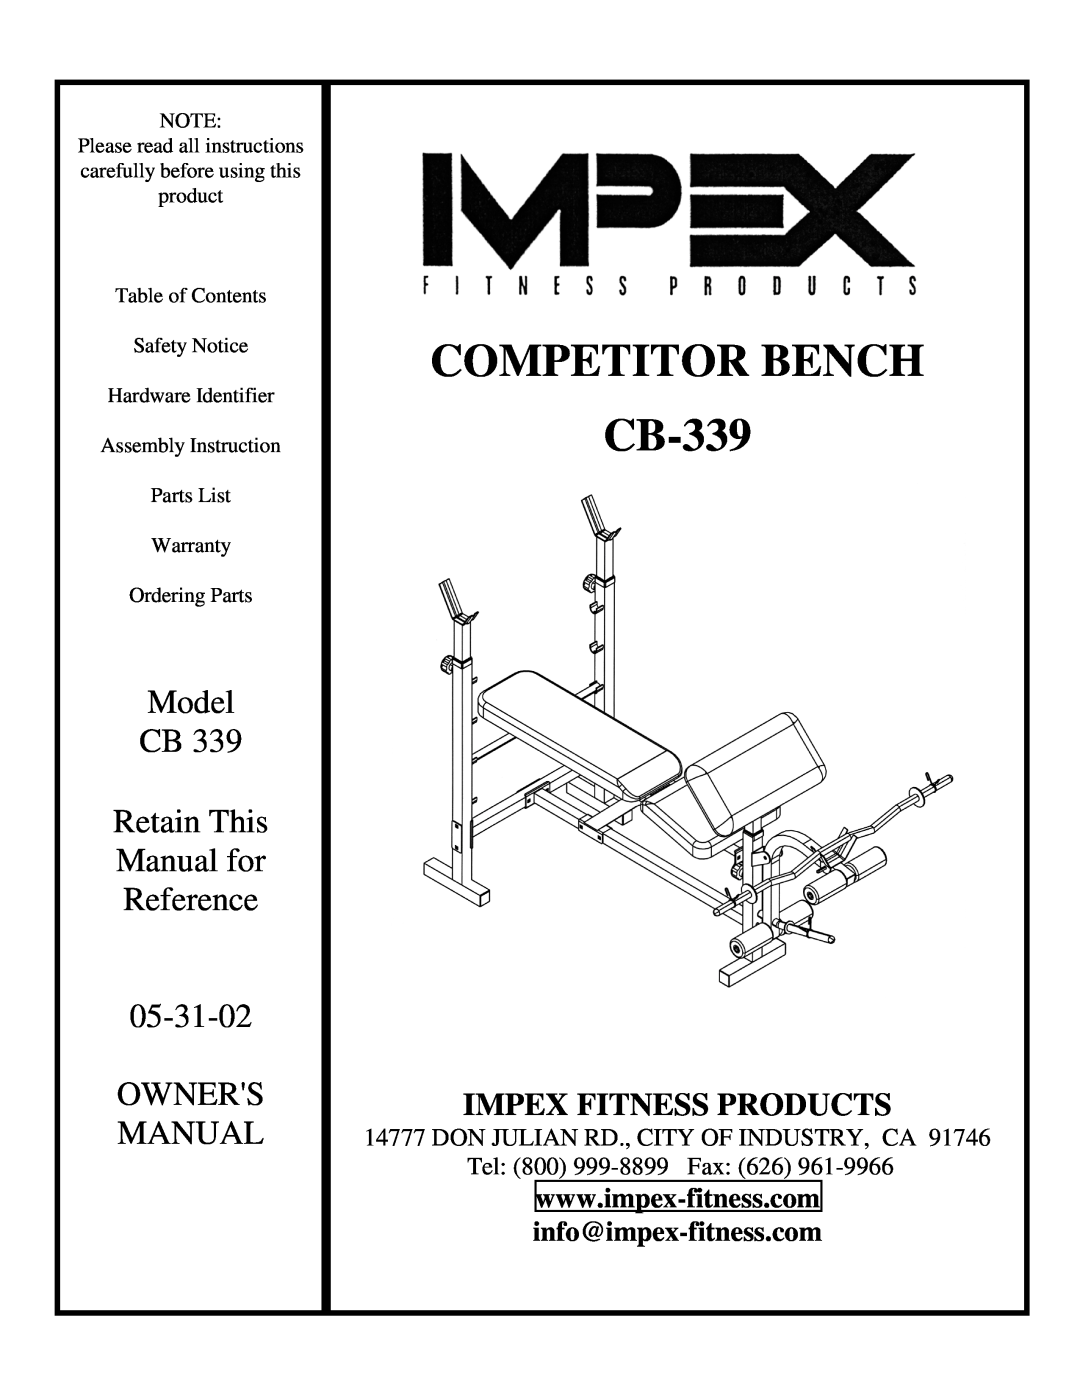 Impex CB-339 manual info@impex-fitness.com, Competitor Bench, Model, Retain This, Manual for, Reference, Owners, 05-31-02 